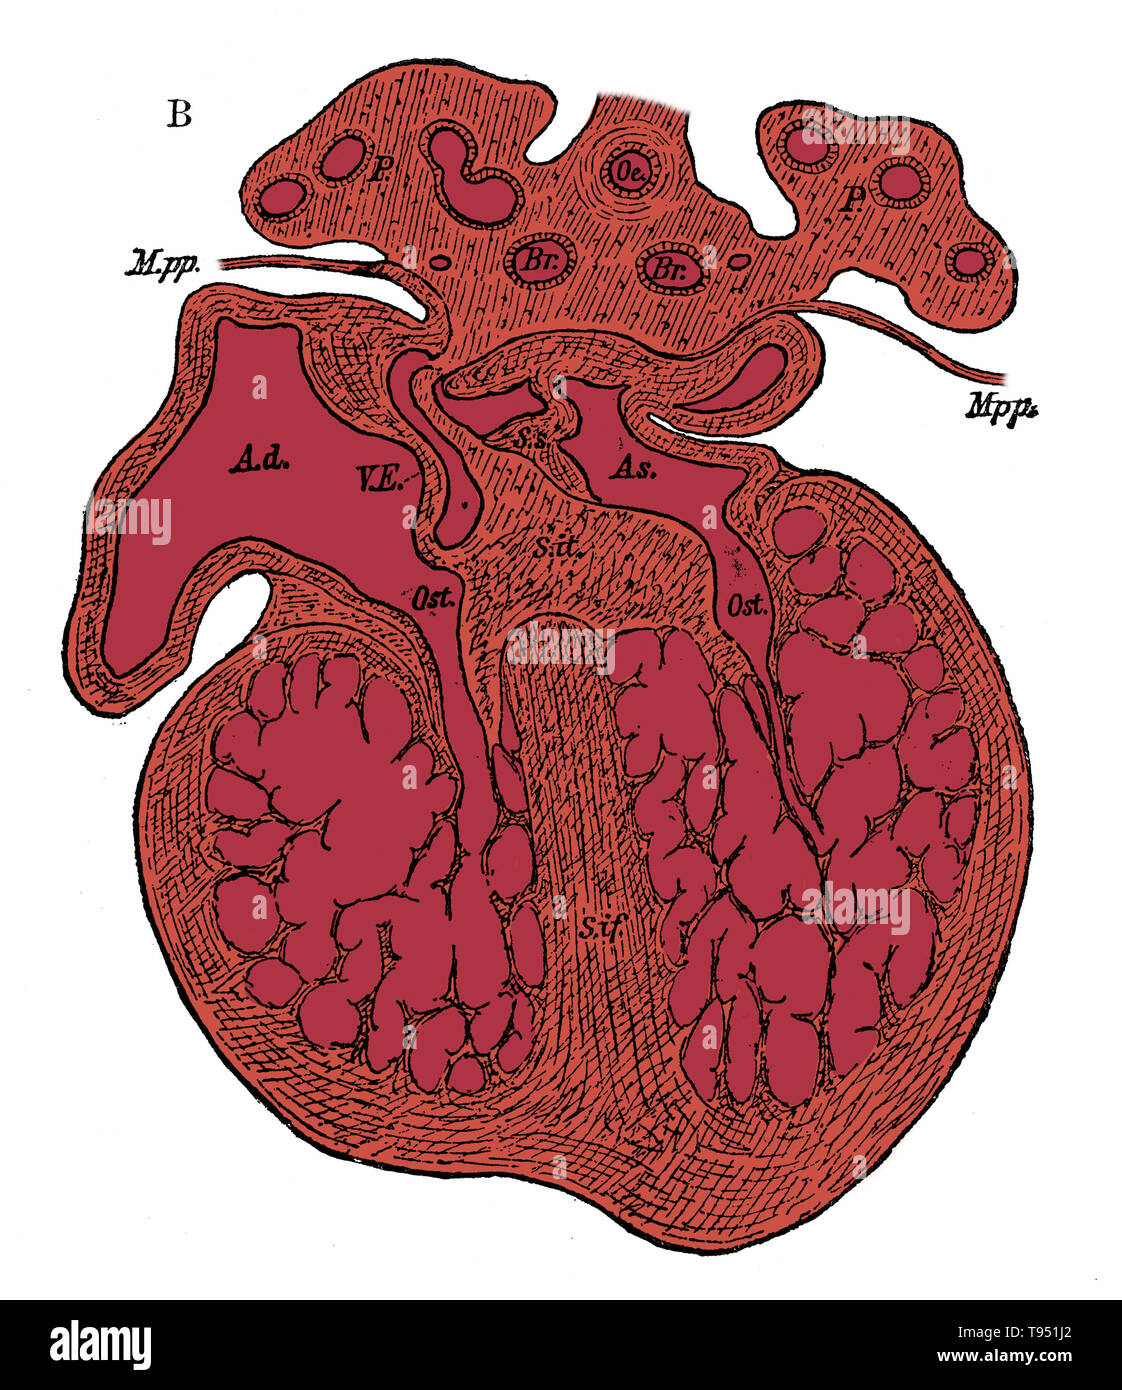 Section through the heart of human embryo showing the formation of the cardiac septa and the auriculo-ventricular valves, (see 9N3690) from a somewhat more advanced embryo. Ad, As, right and left auricle; Ost, auriculo-ventricular apertures; S.s, septum superior of auricles; S. it, endocardial cushion (septum intermedium); S. if, septum infers ventriculorum, now denser and more muscular. Stock Photo